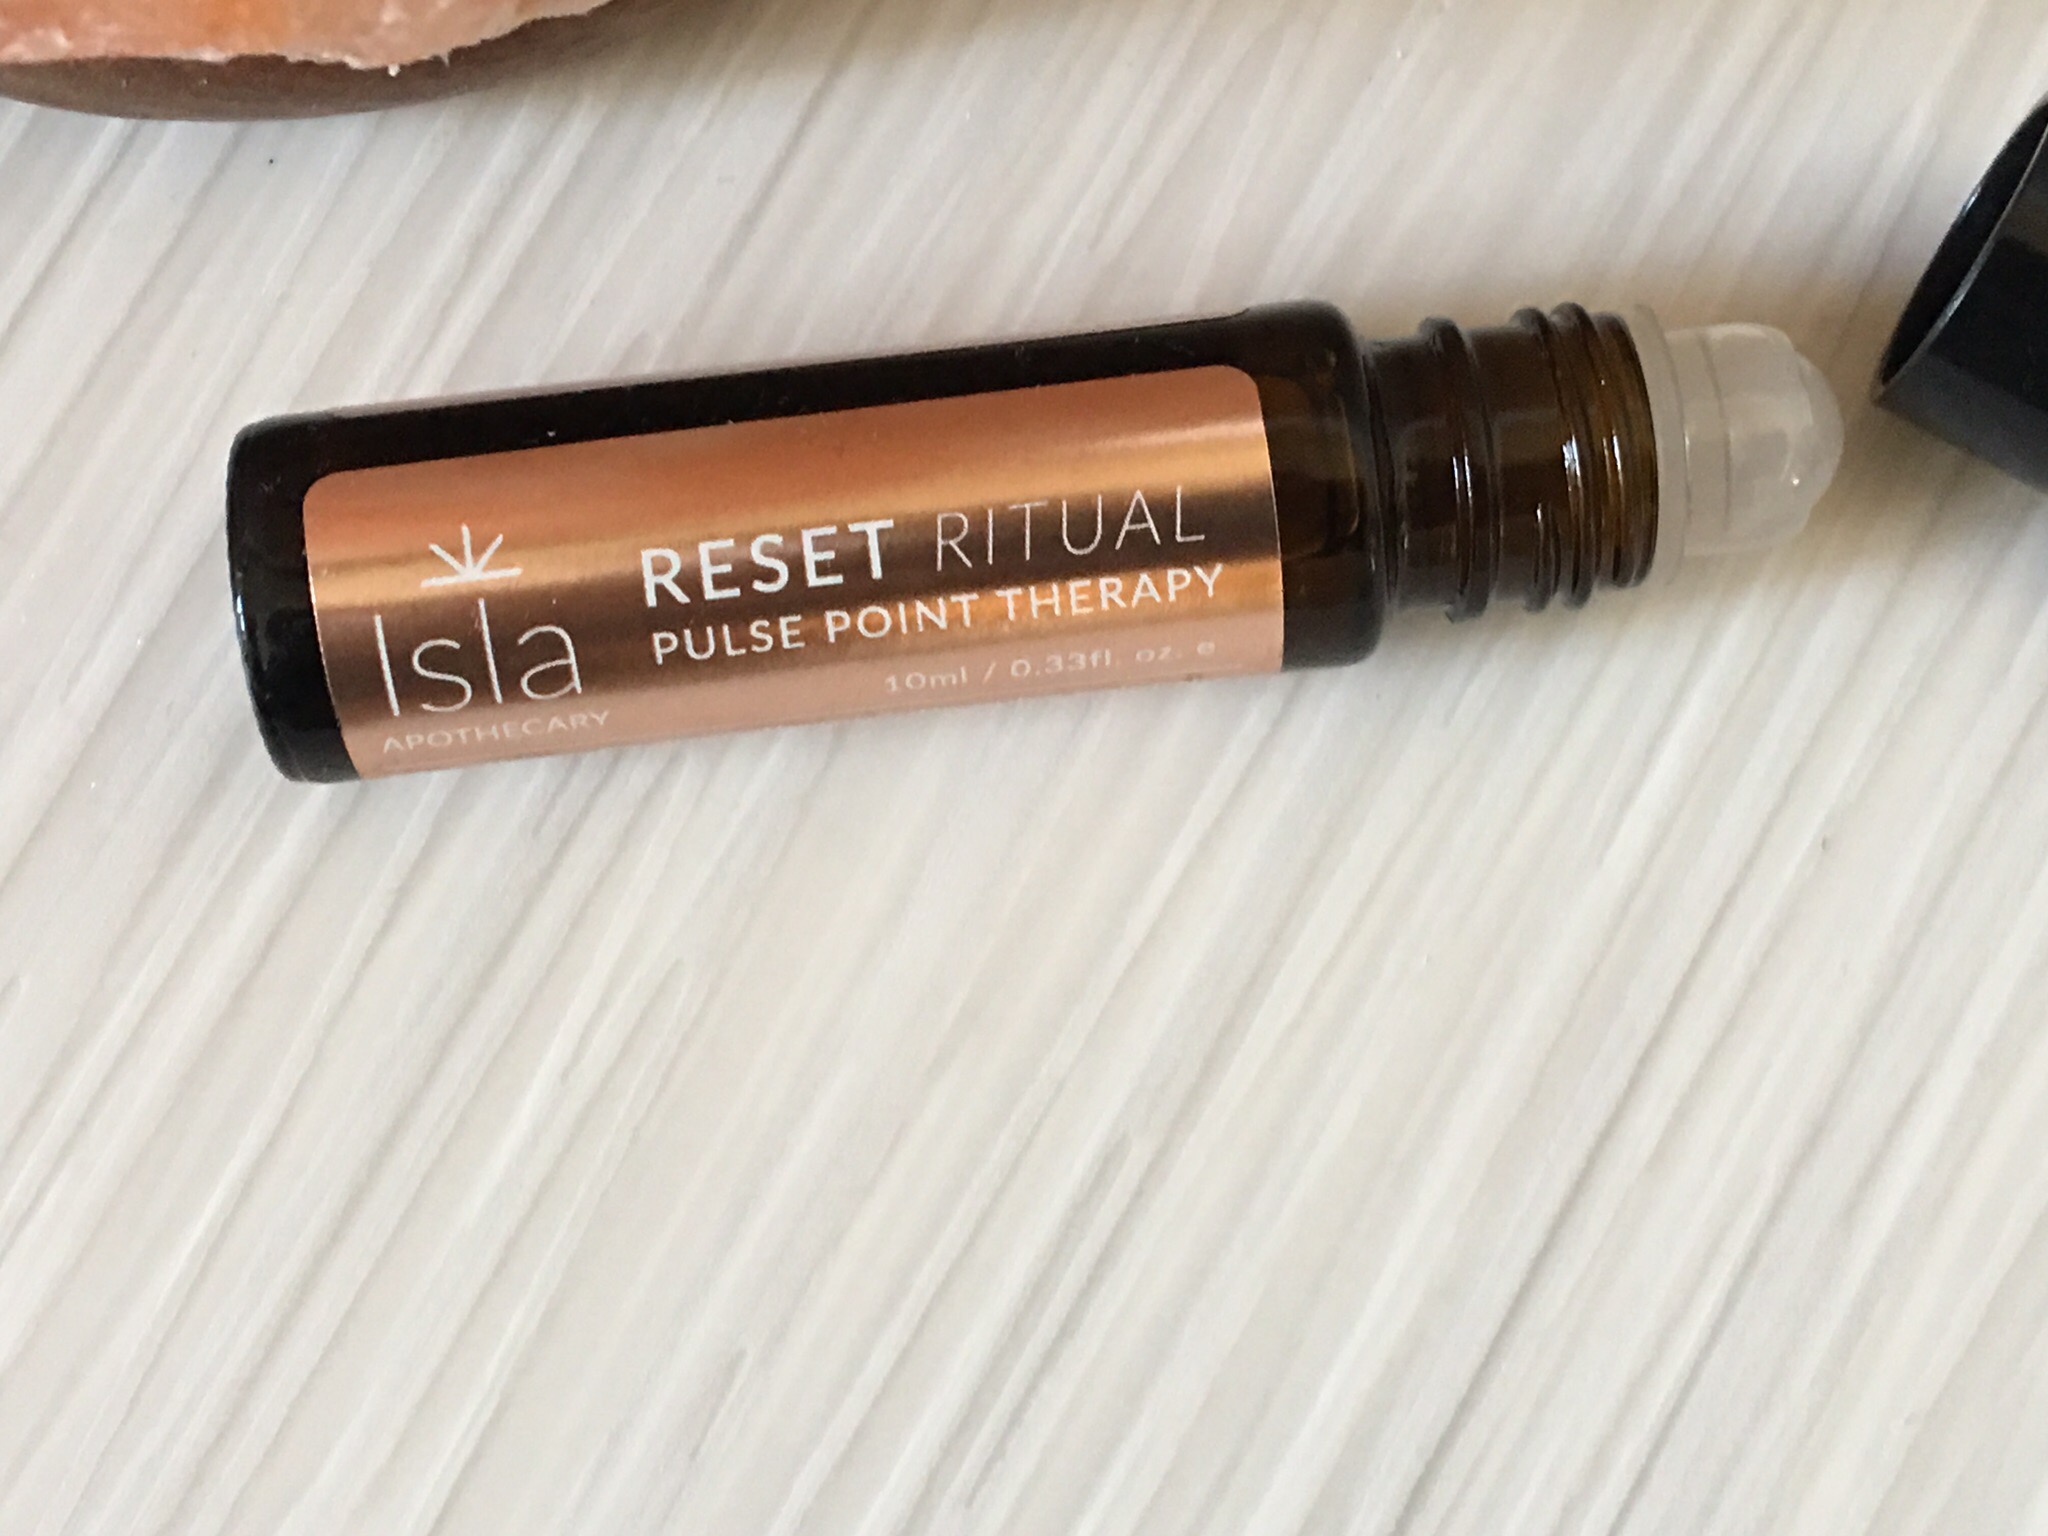 Isla apothecary reset ritual pulse point therapy